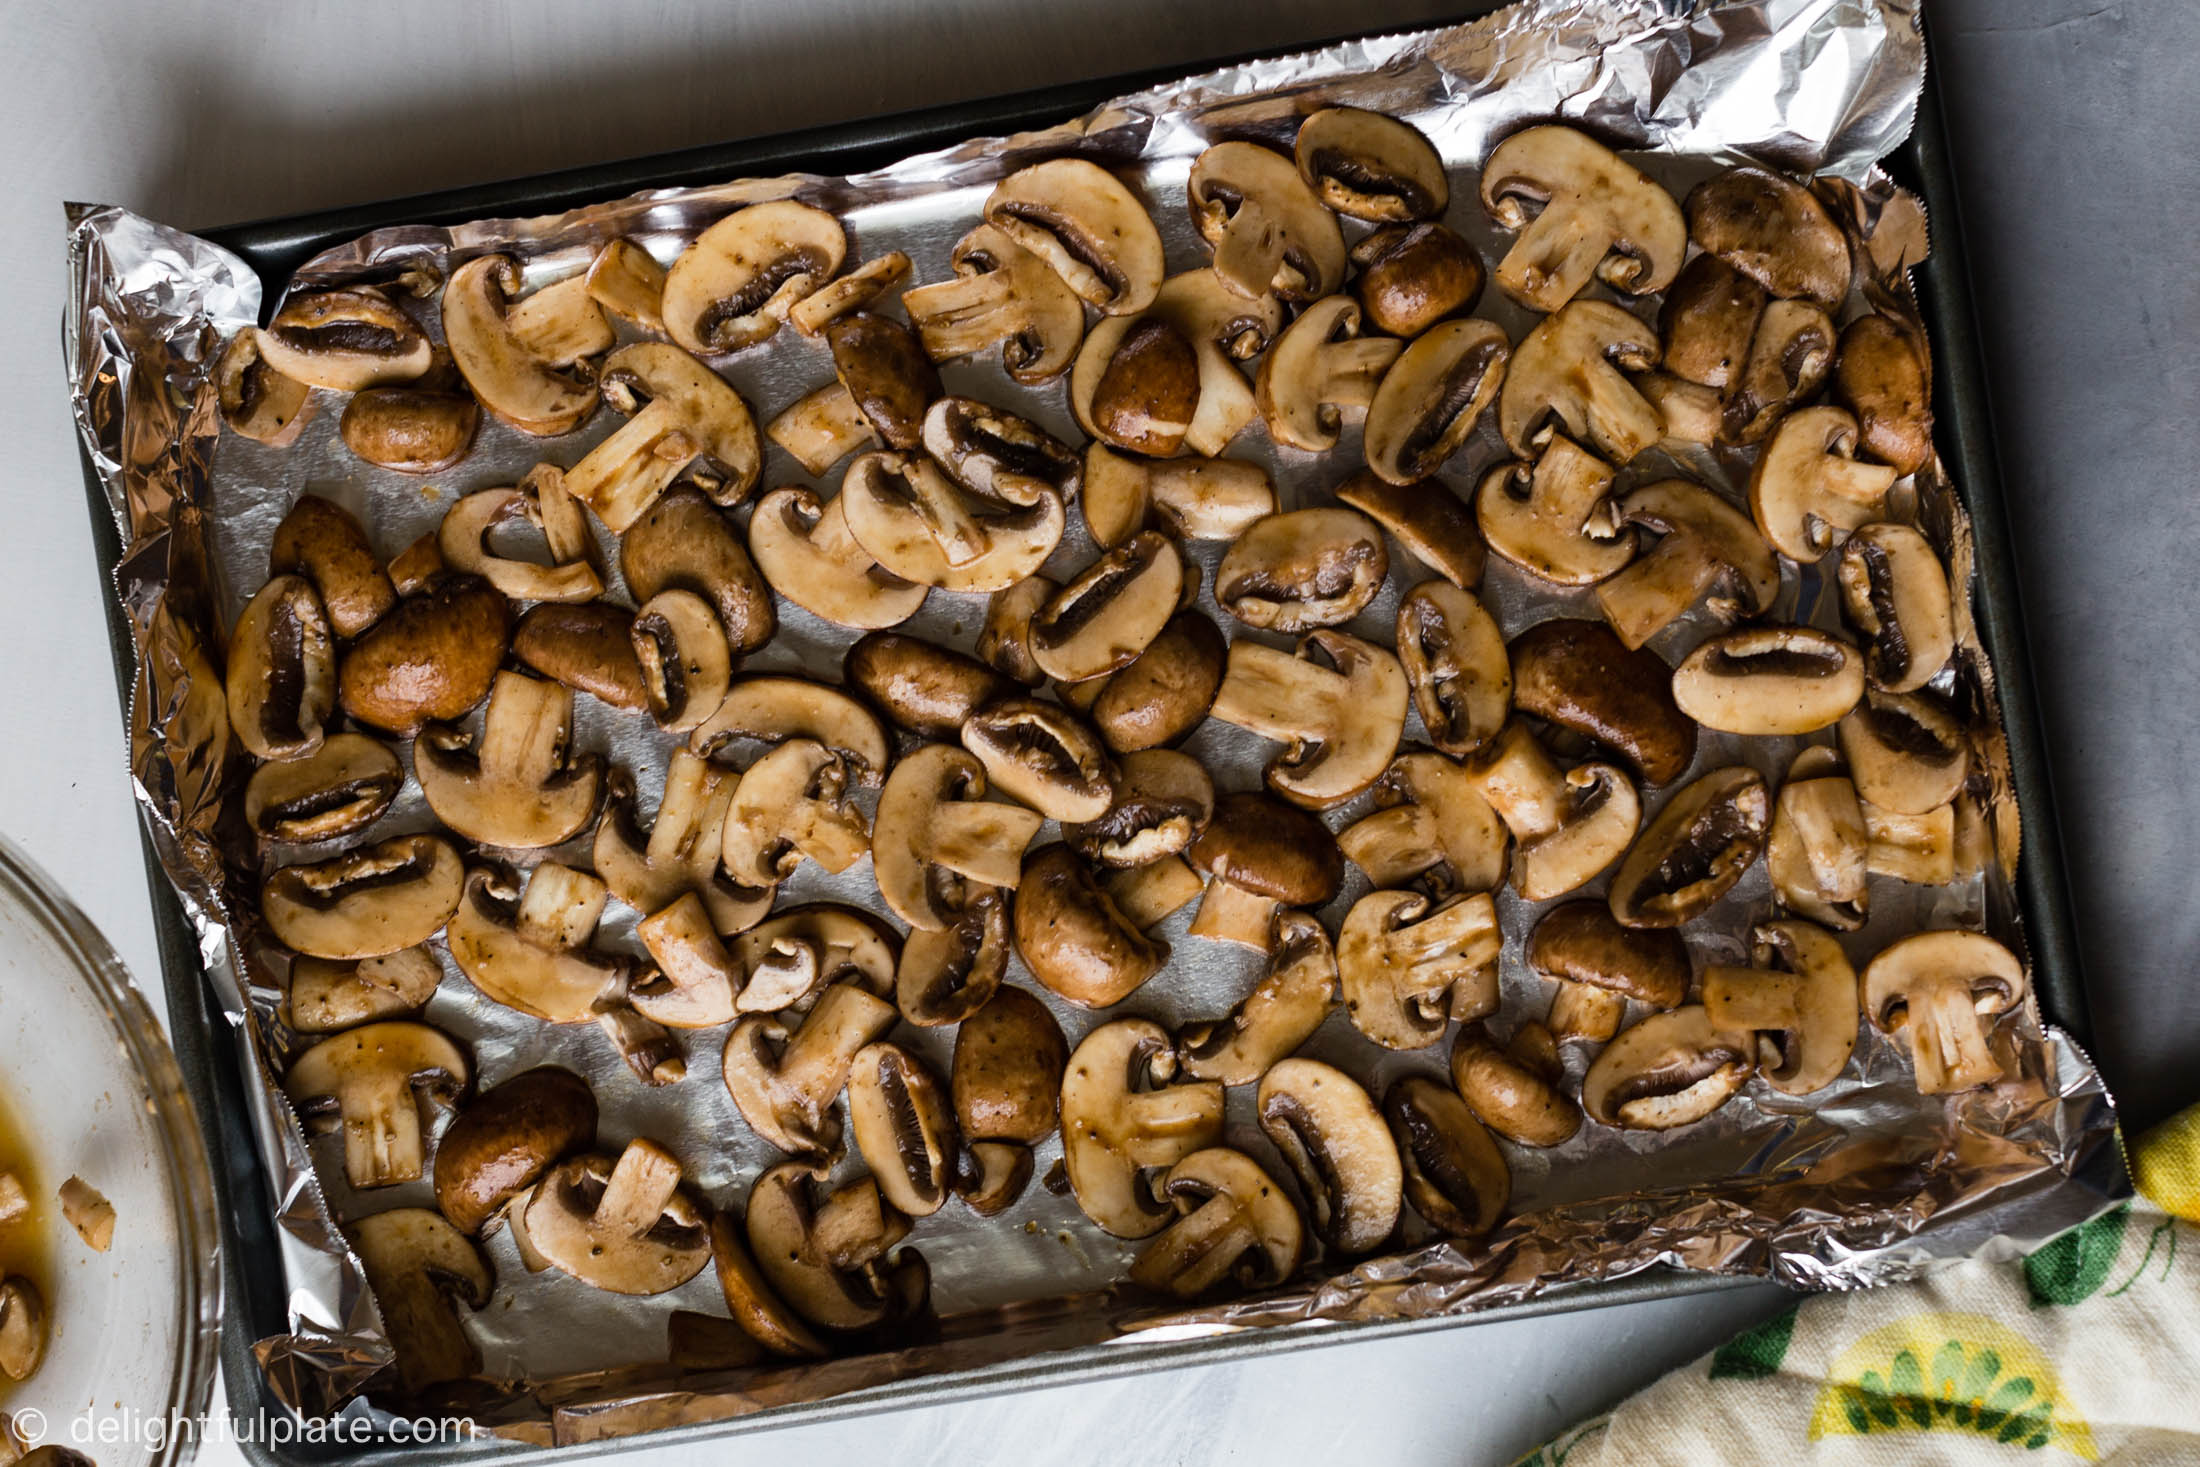 Mushroom slices marinated with soy sauce. Bake for 50-60 minutes to desired texture.